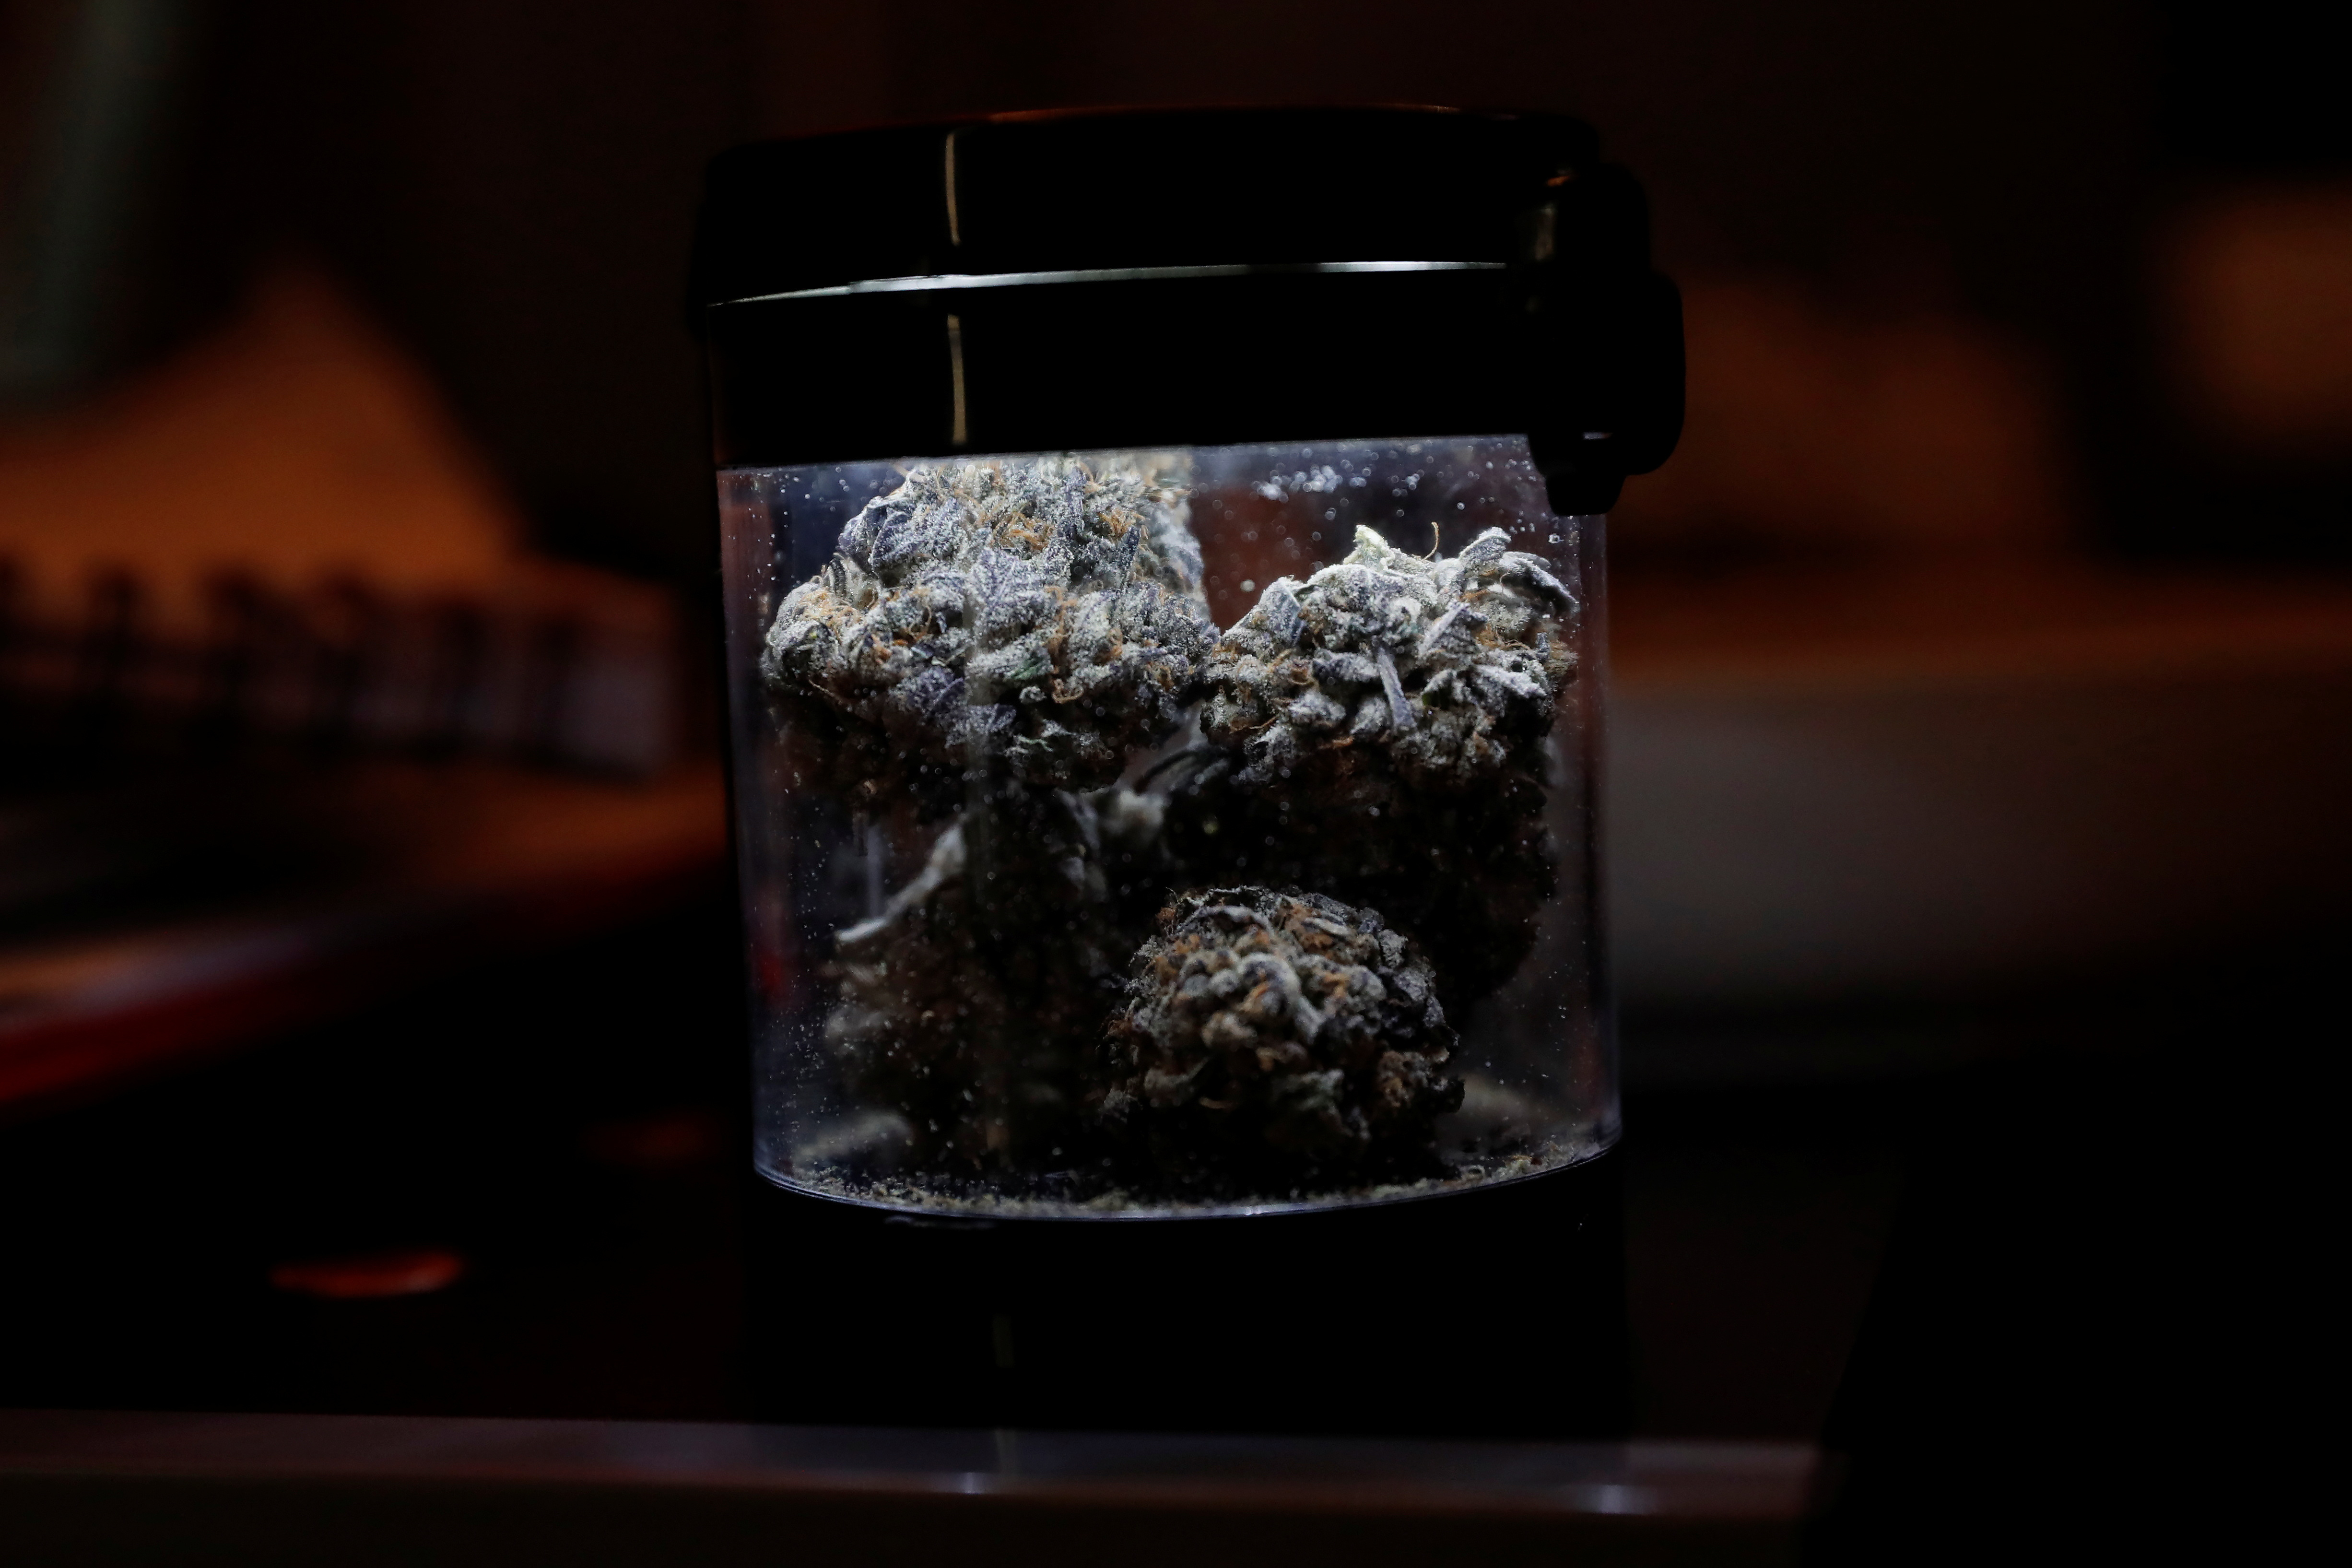 Hybrid strains of cannabis are pictured in a jar at a home in New York in this illustration picture